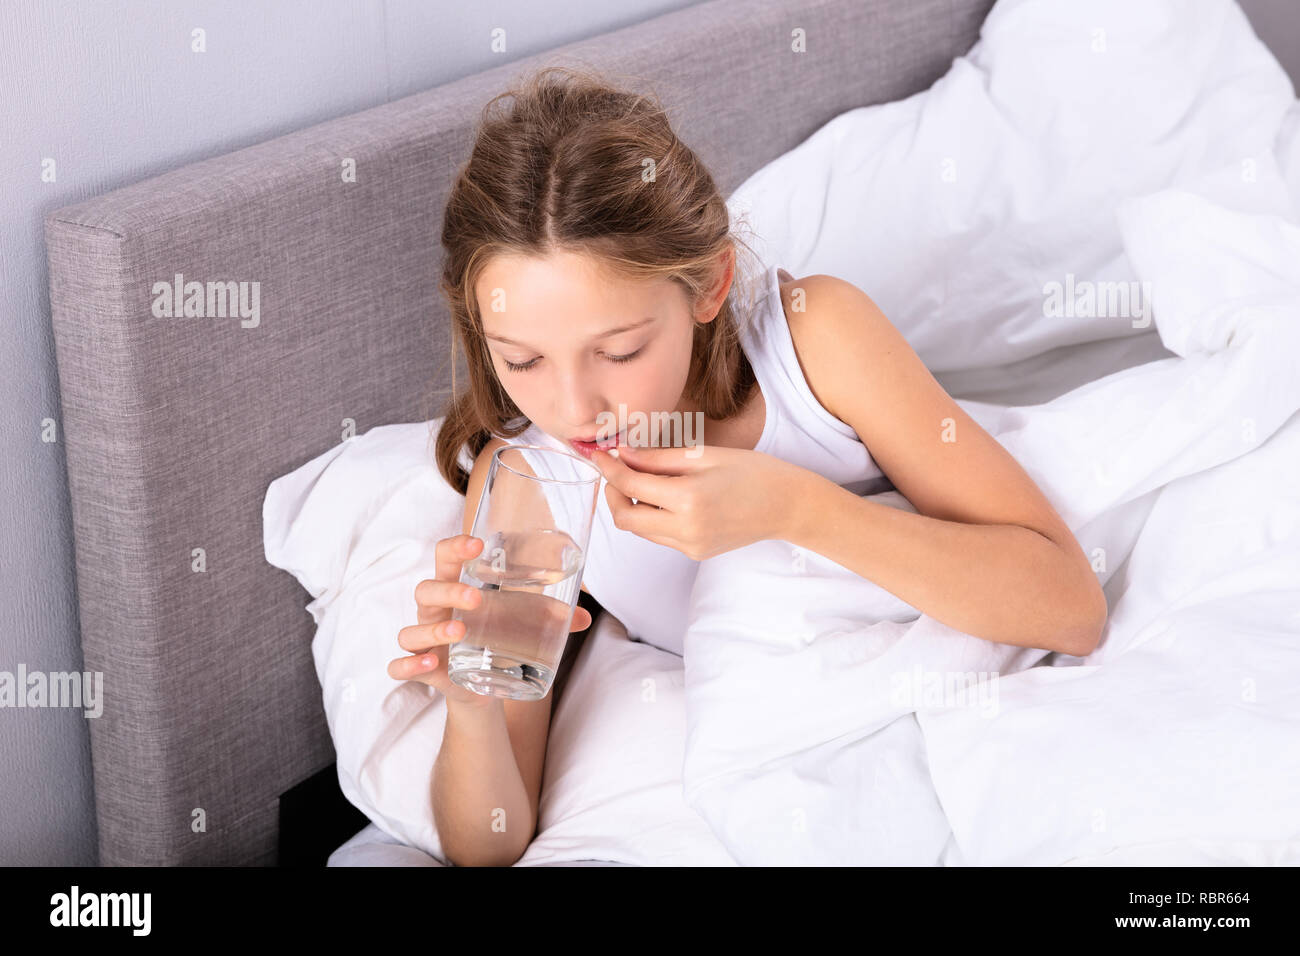 Girl Lying On Bed Taking Medicine With Glass Of Water Stock Photo